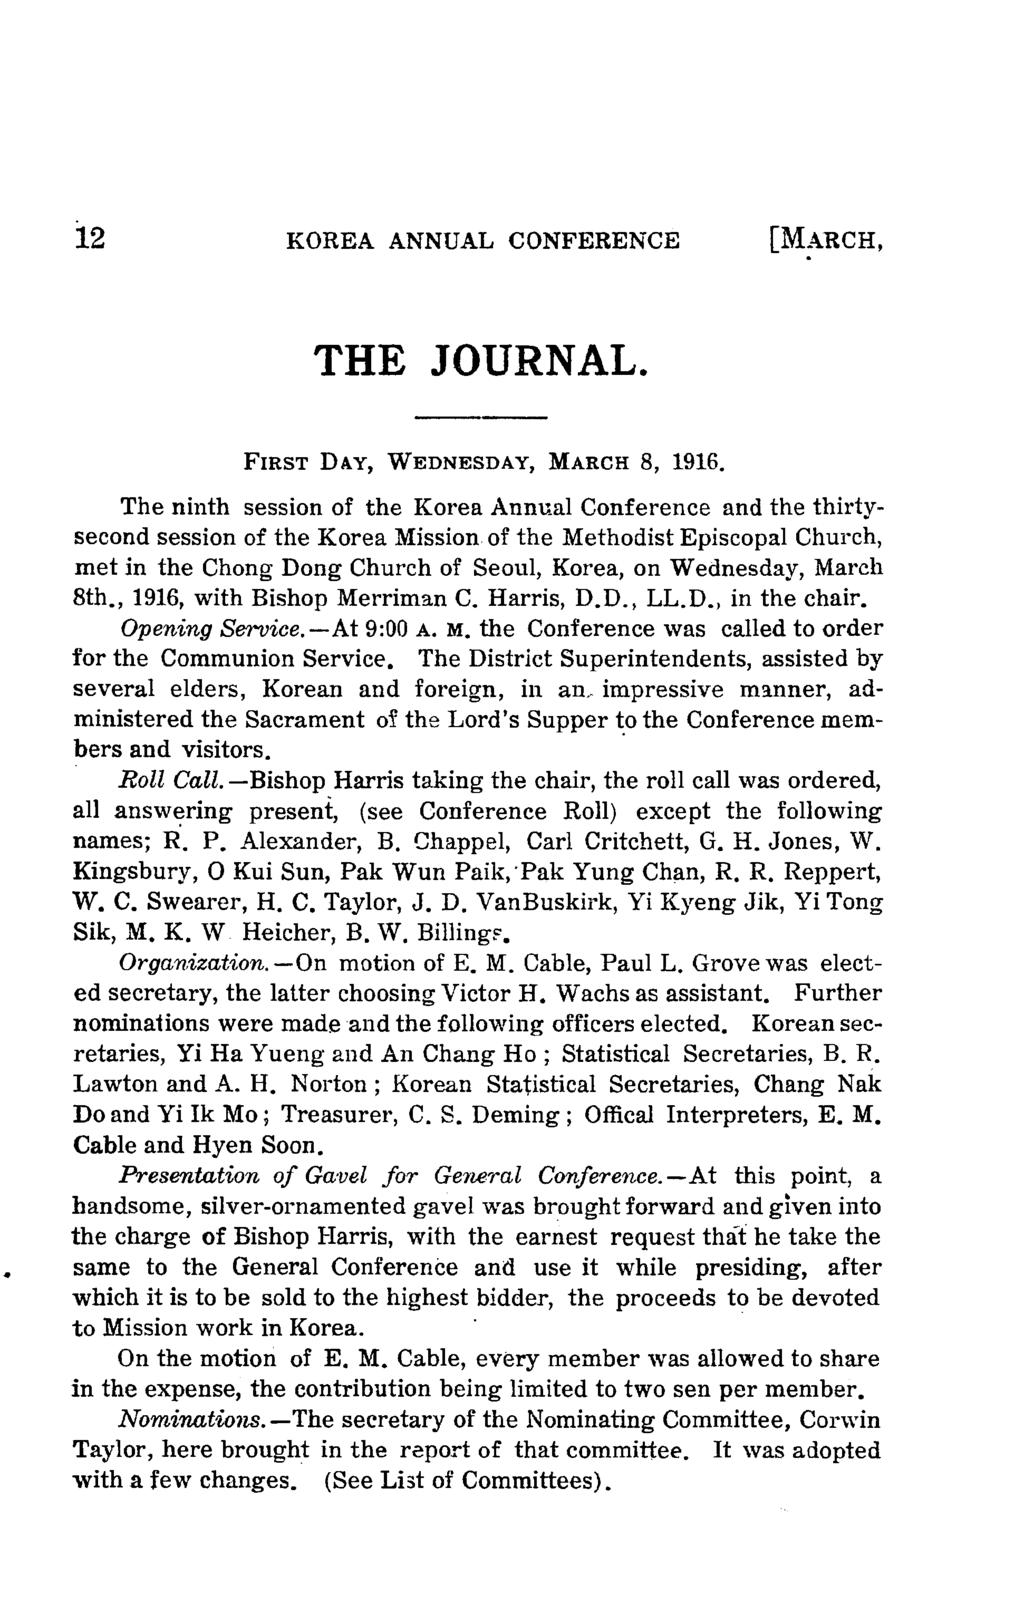 12 KOREA ANNUAL CONFERENCE THE JOURNAL. FIRST DAY, WEDNESDAY, MARCH 8, 1916.